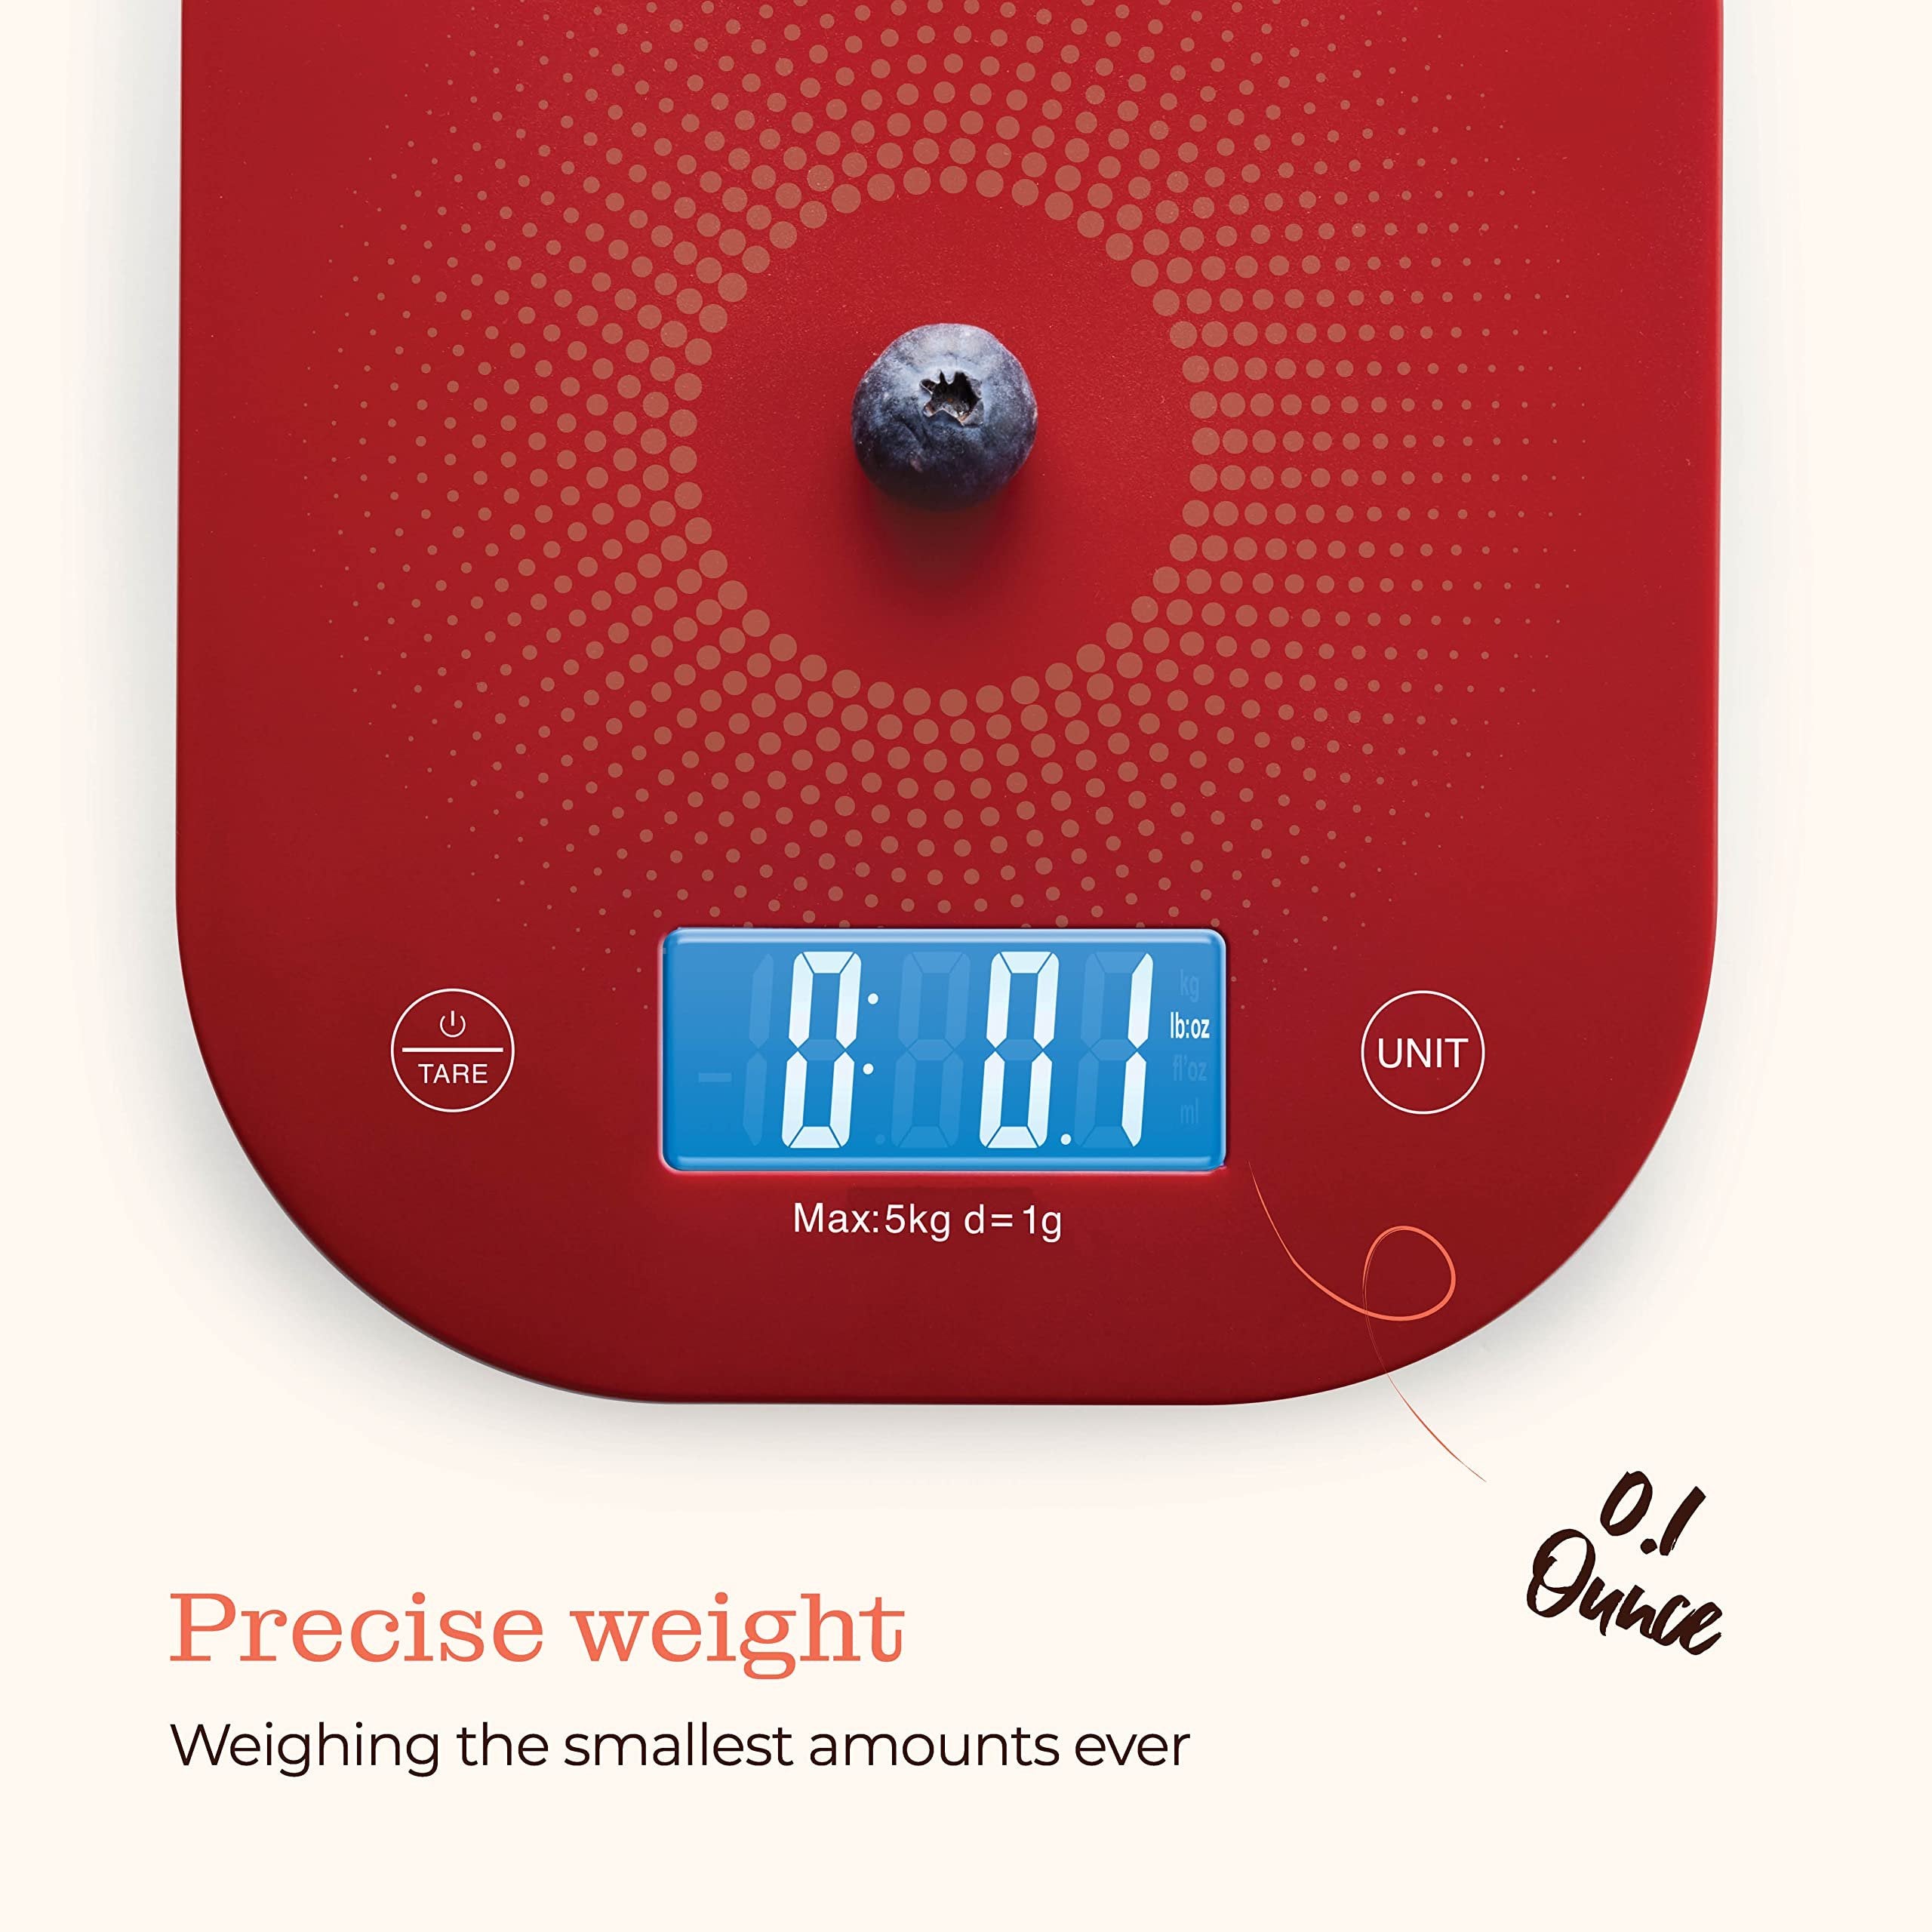 Digital Kitchen Food Scale - LCD Display Weight in Grams, Kilograms, Ounces, Fl Ounces, Milliliters, and Pounds Perfect for Precise Measurements, Baking, Cooking, Meal Prep, Weight Loss,